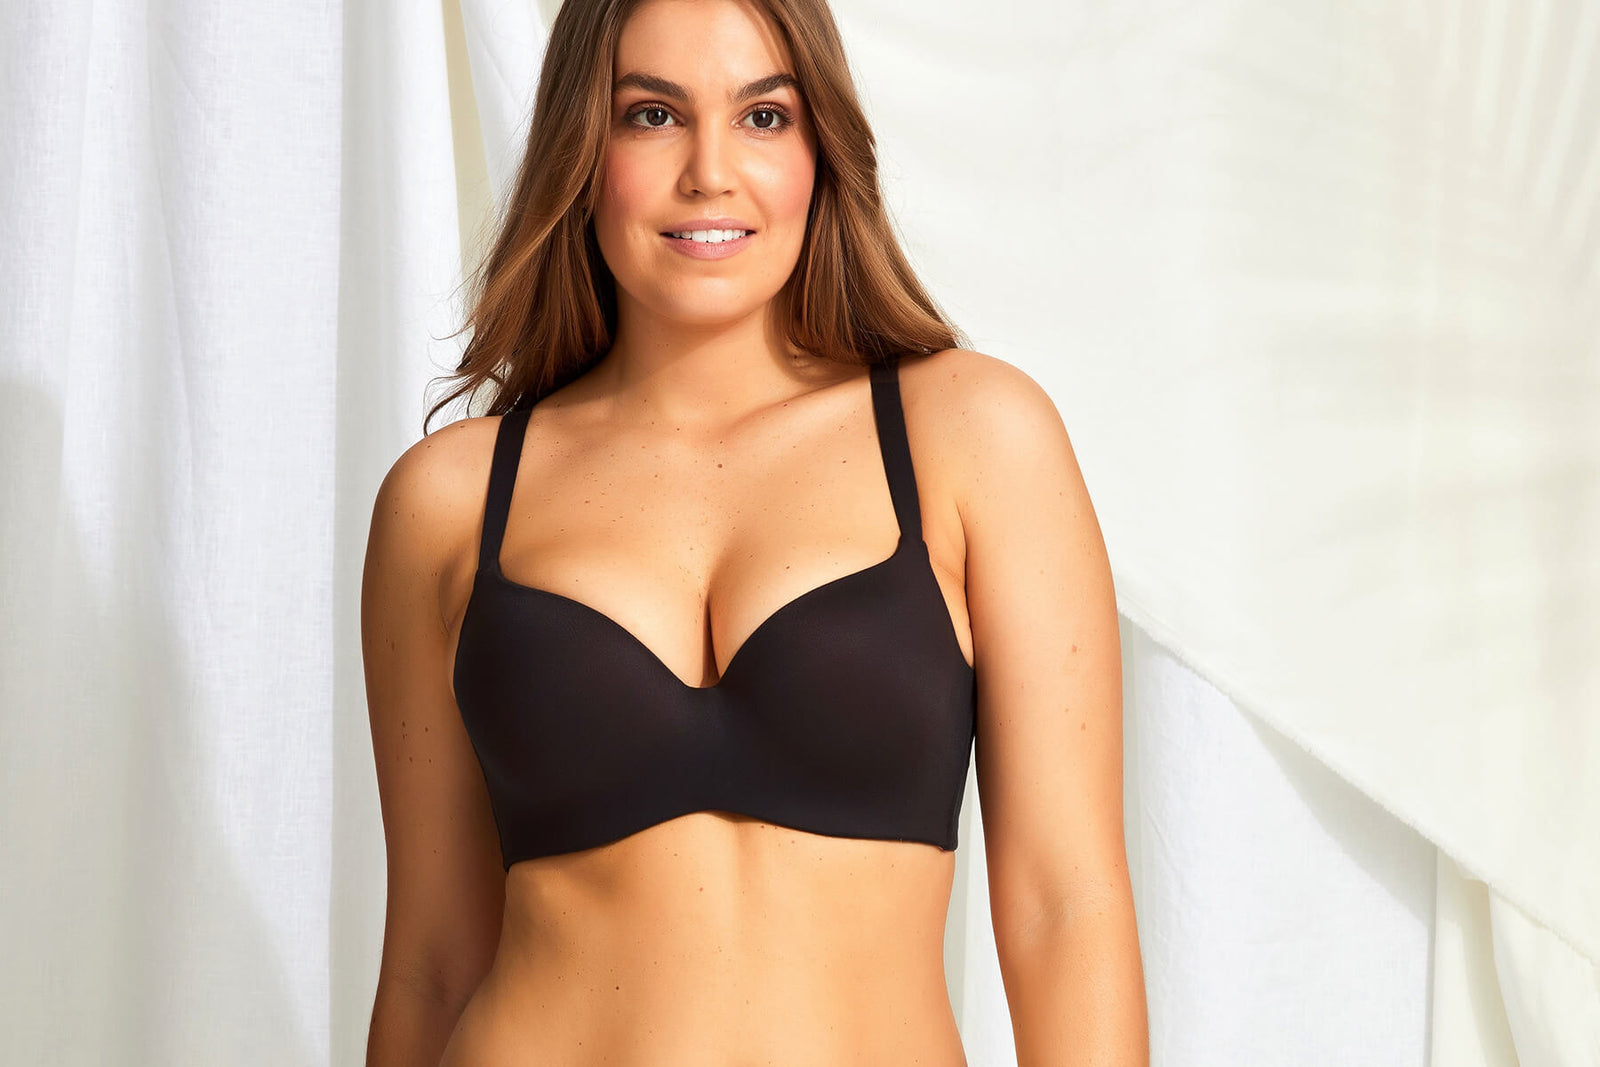 Memory Foam Bra Cups: What's the Hype About? - Fine Lines Lingerie